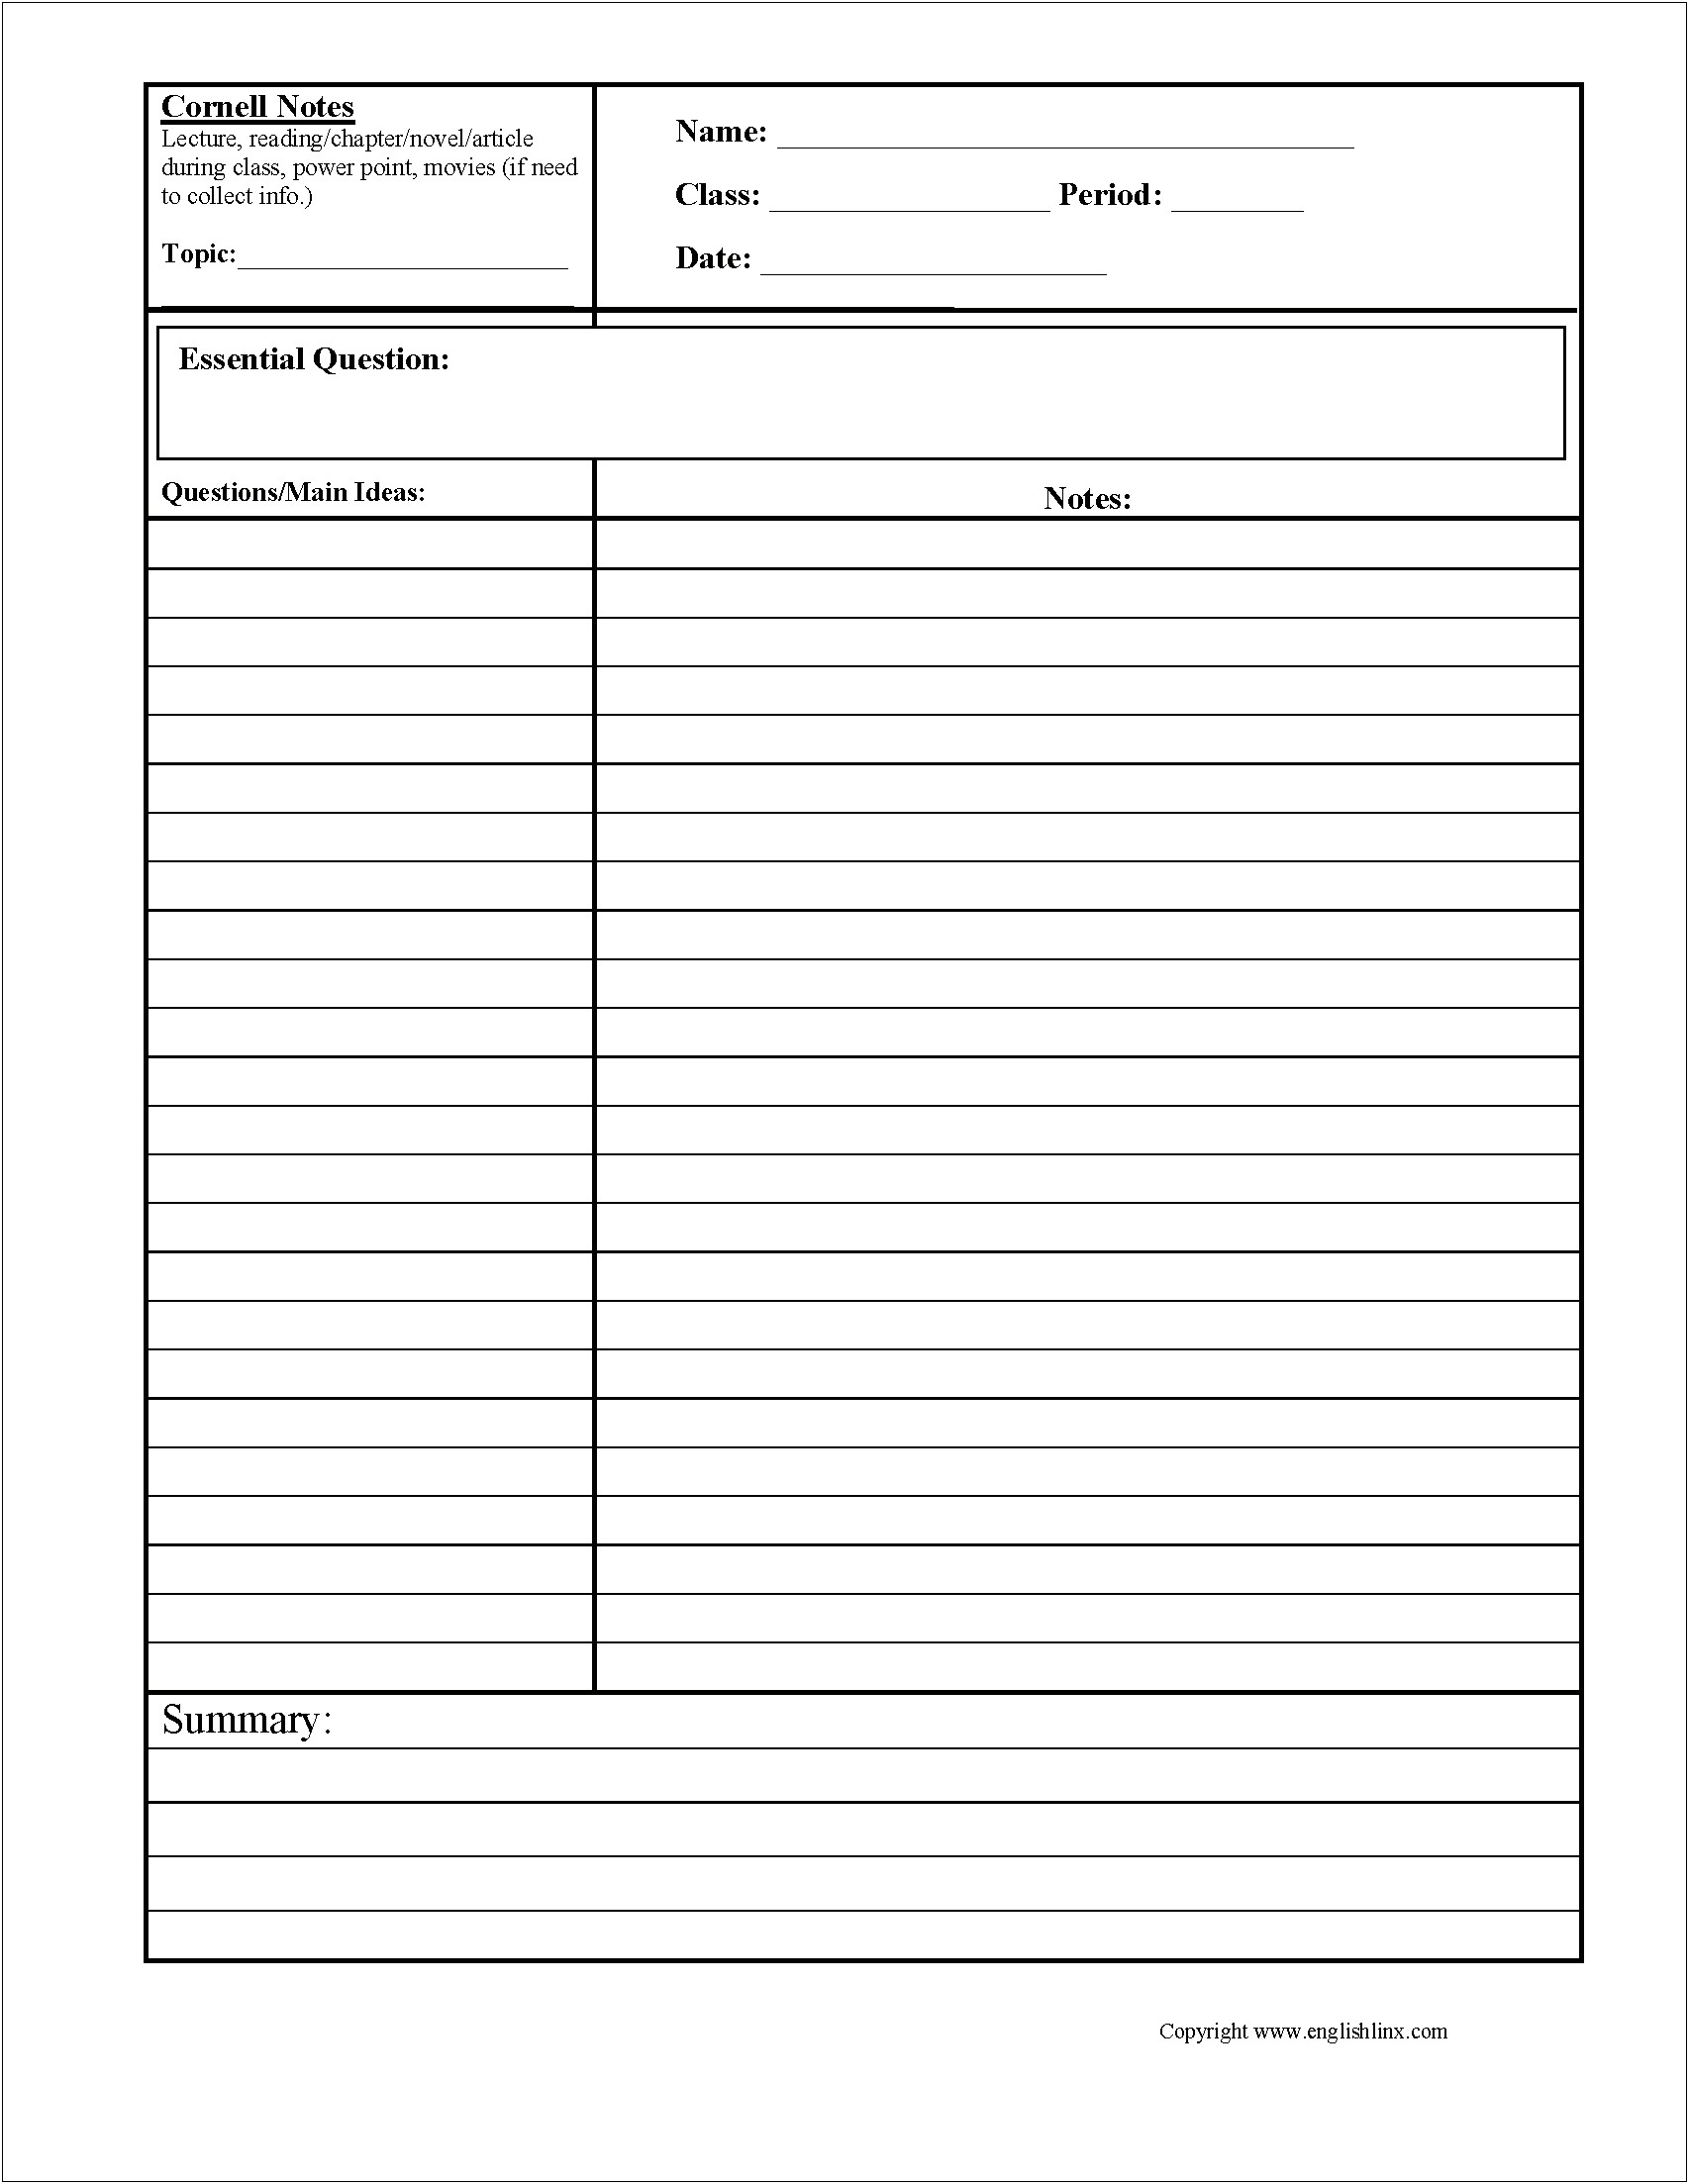 Avid Cornell Notes Template Word Document